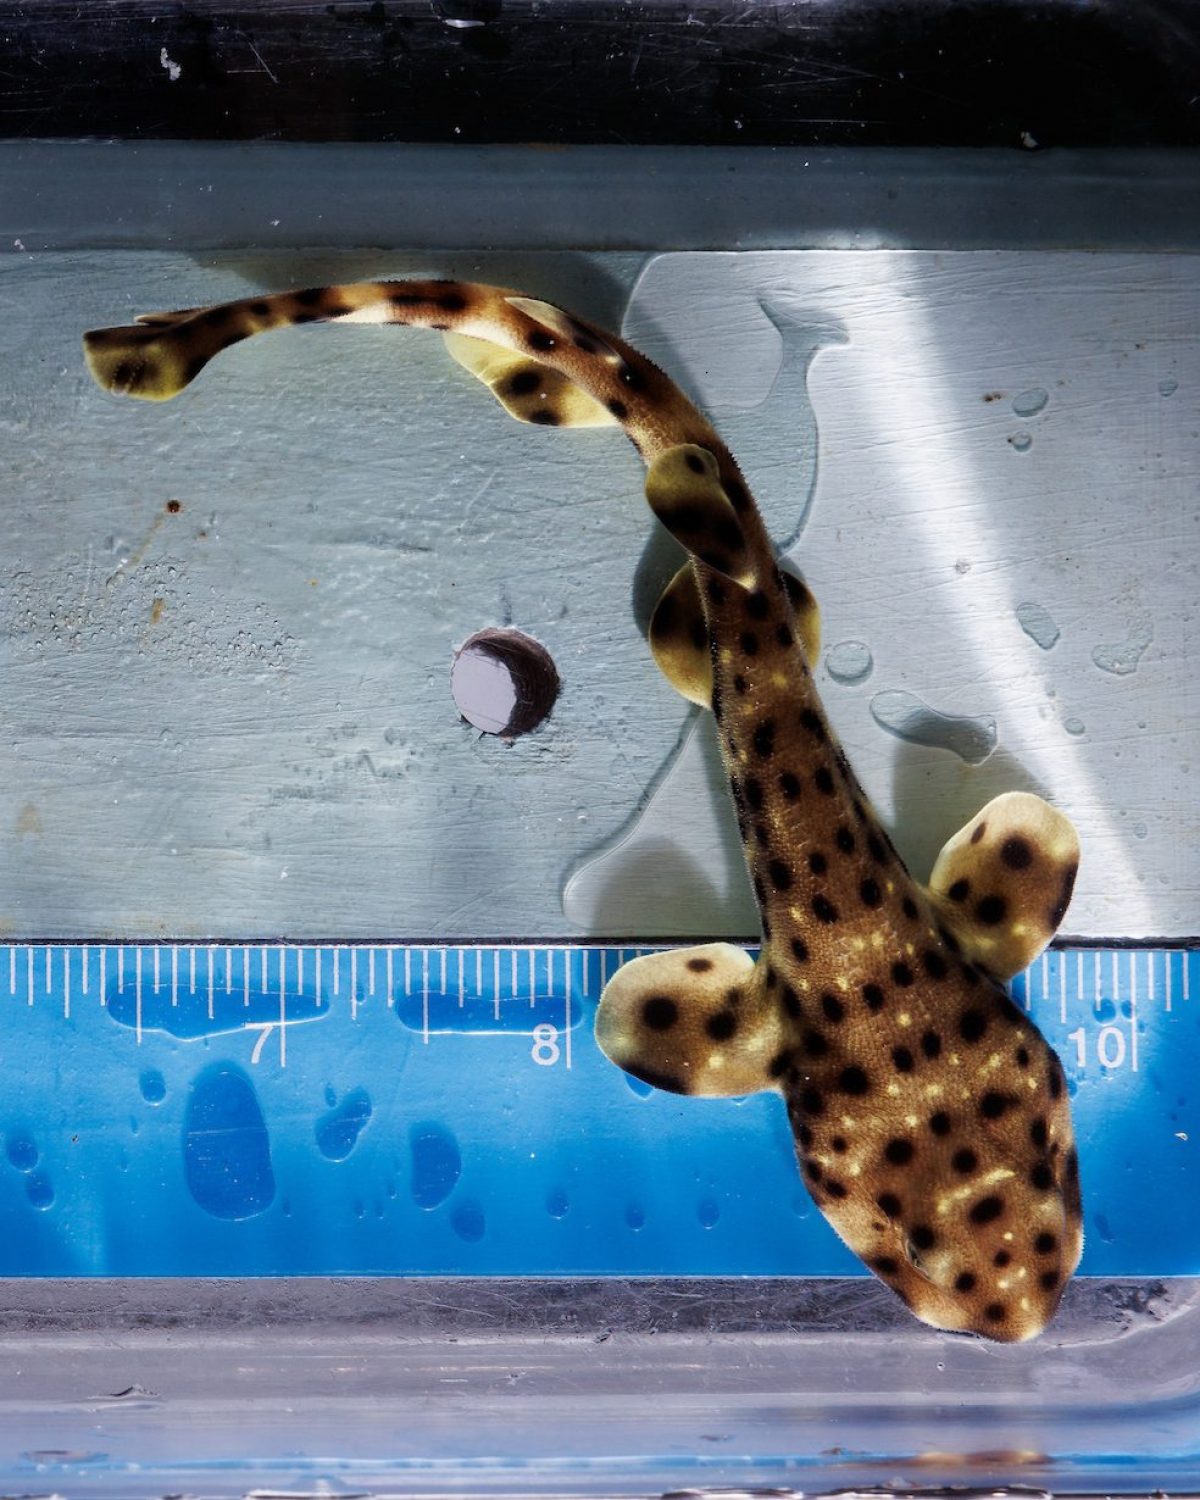 A newly hatched Swell Shark (Cephaloscyllium ventriosum) and its egg at the Tennessee Aquarium.